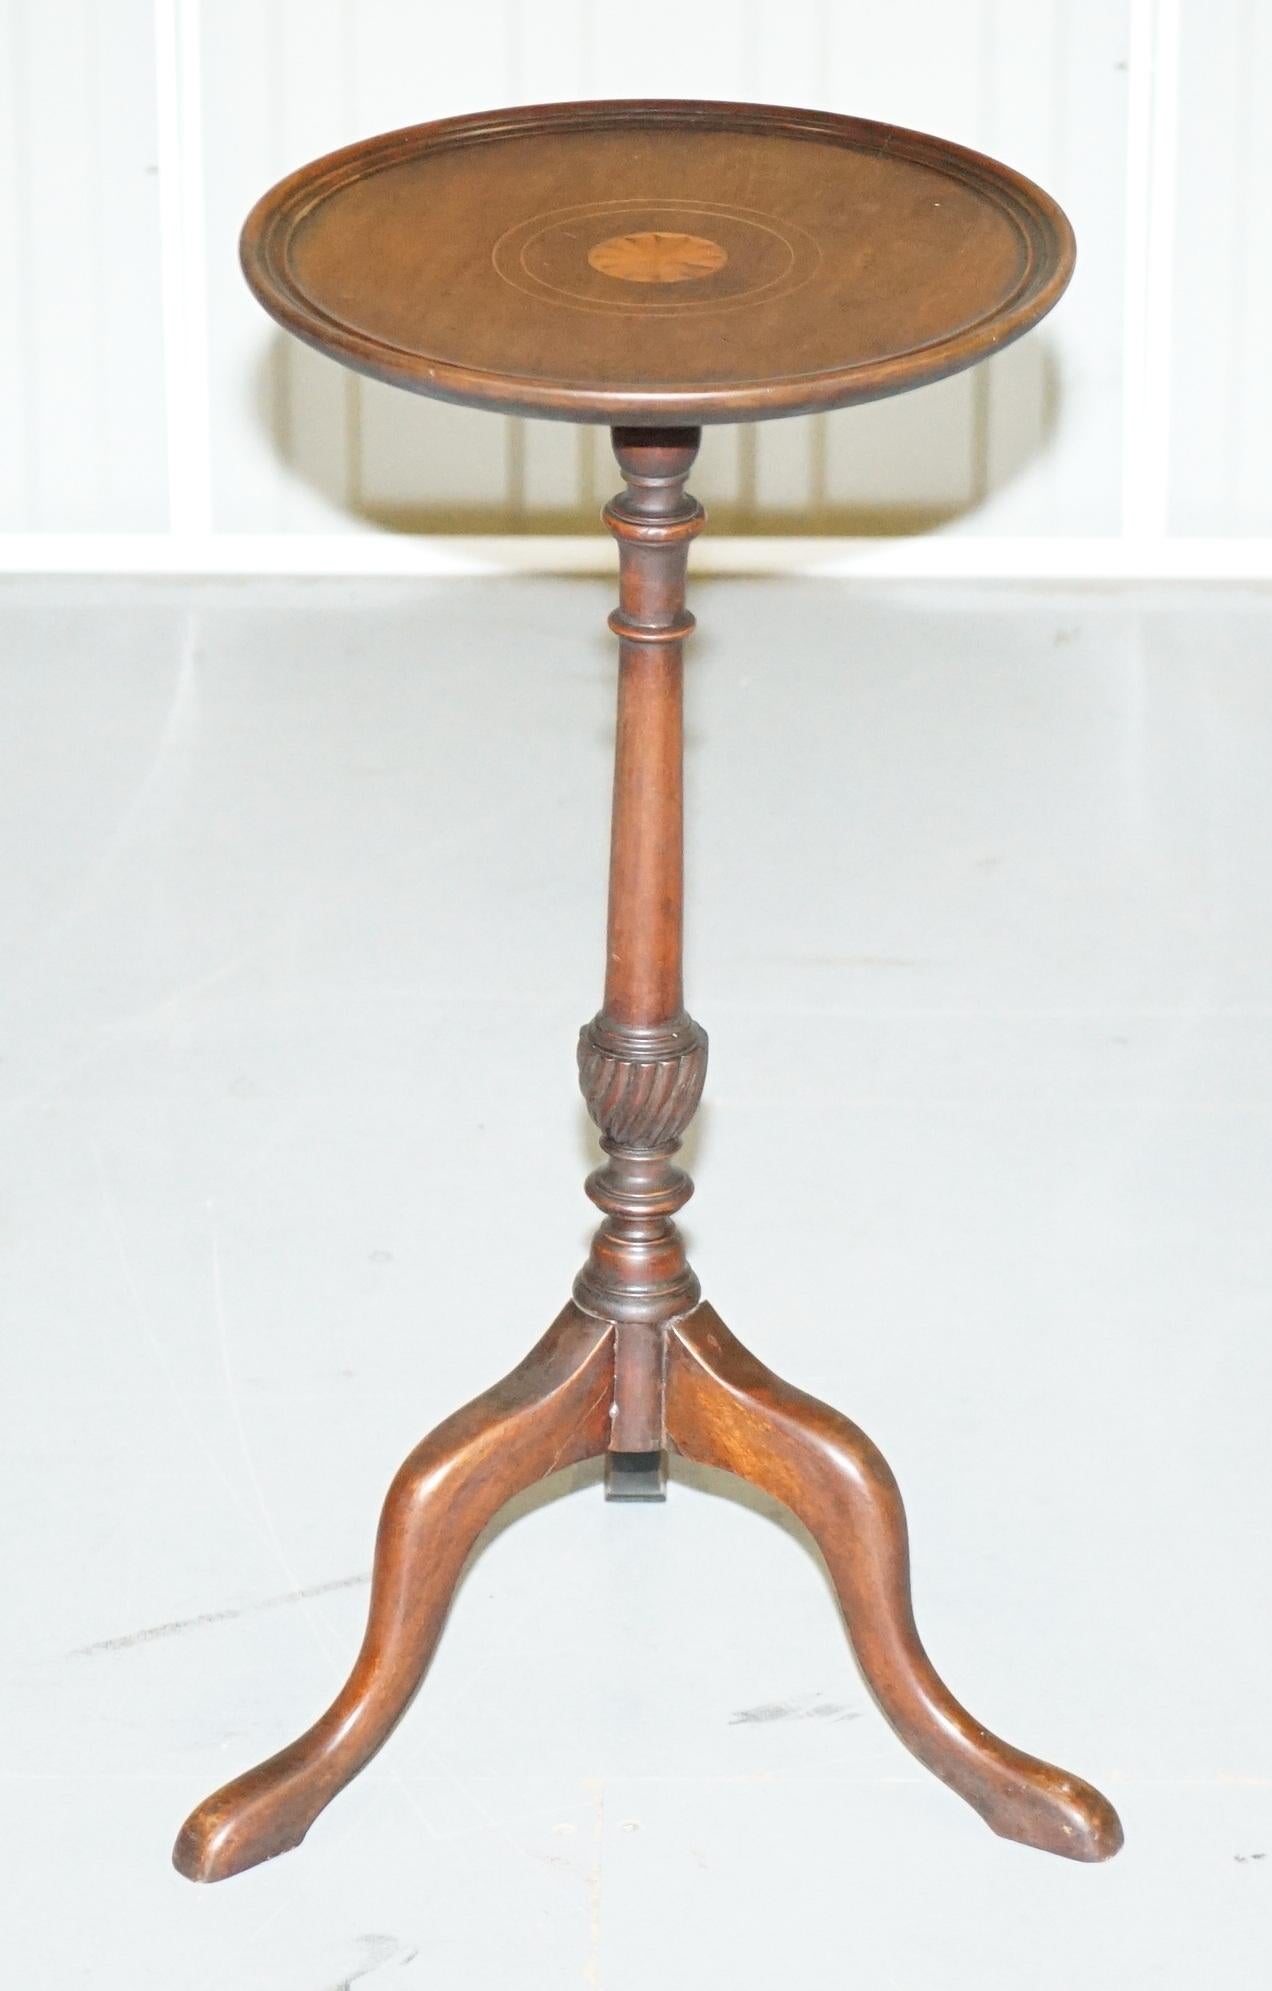 We are delighted to offer for sale this lovely medium sized mahogany Sheraton revival lamp or wine table

A very good looking and well made piece, it mahogany with decorative Sheraton revival style inlay to the top

We have cleaned waxed and